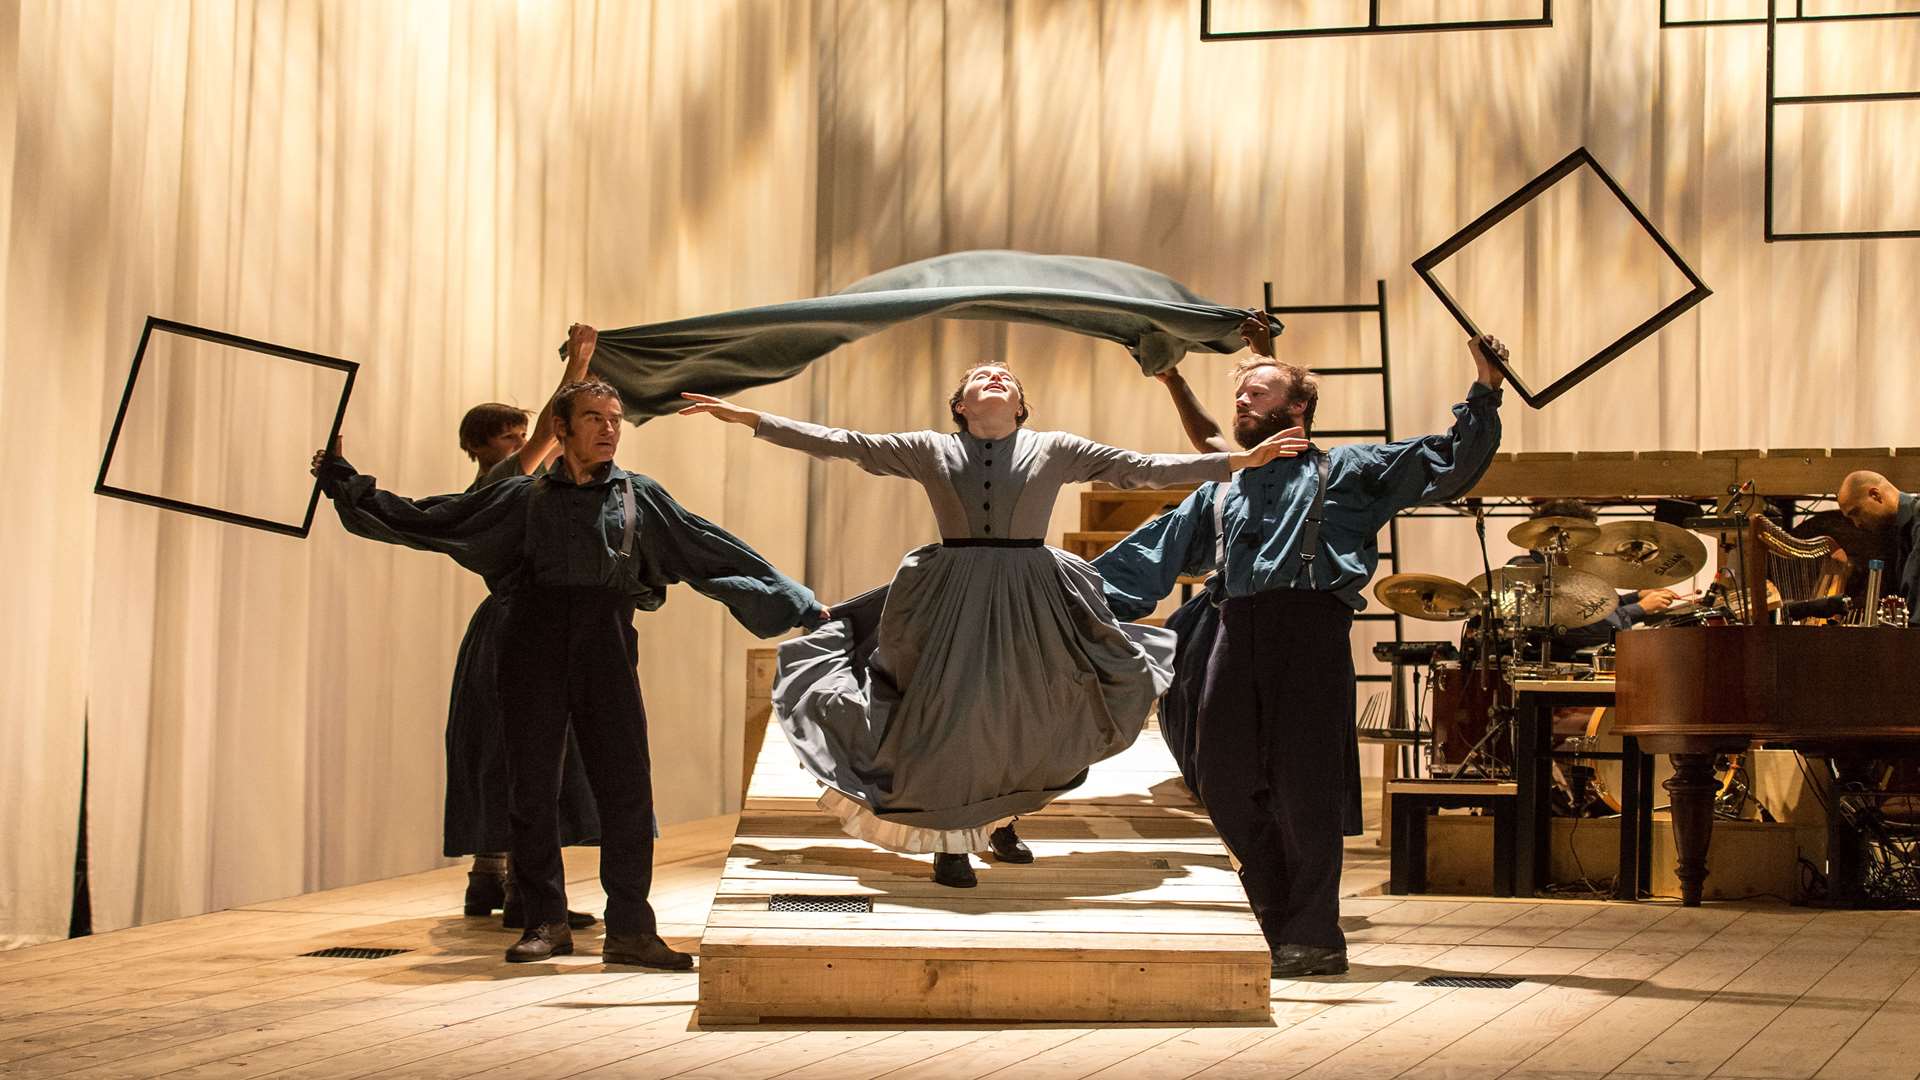 Jane Eyre is a National Theatre production